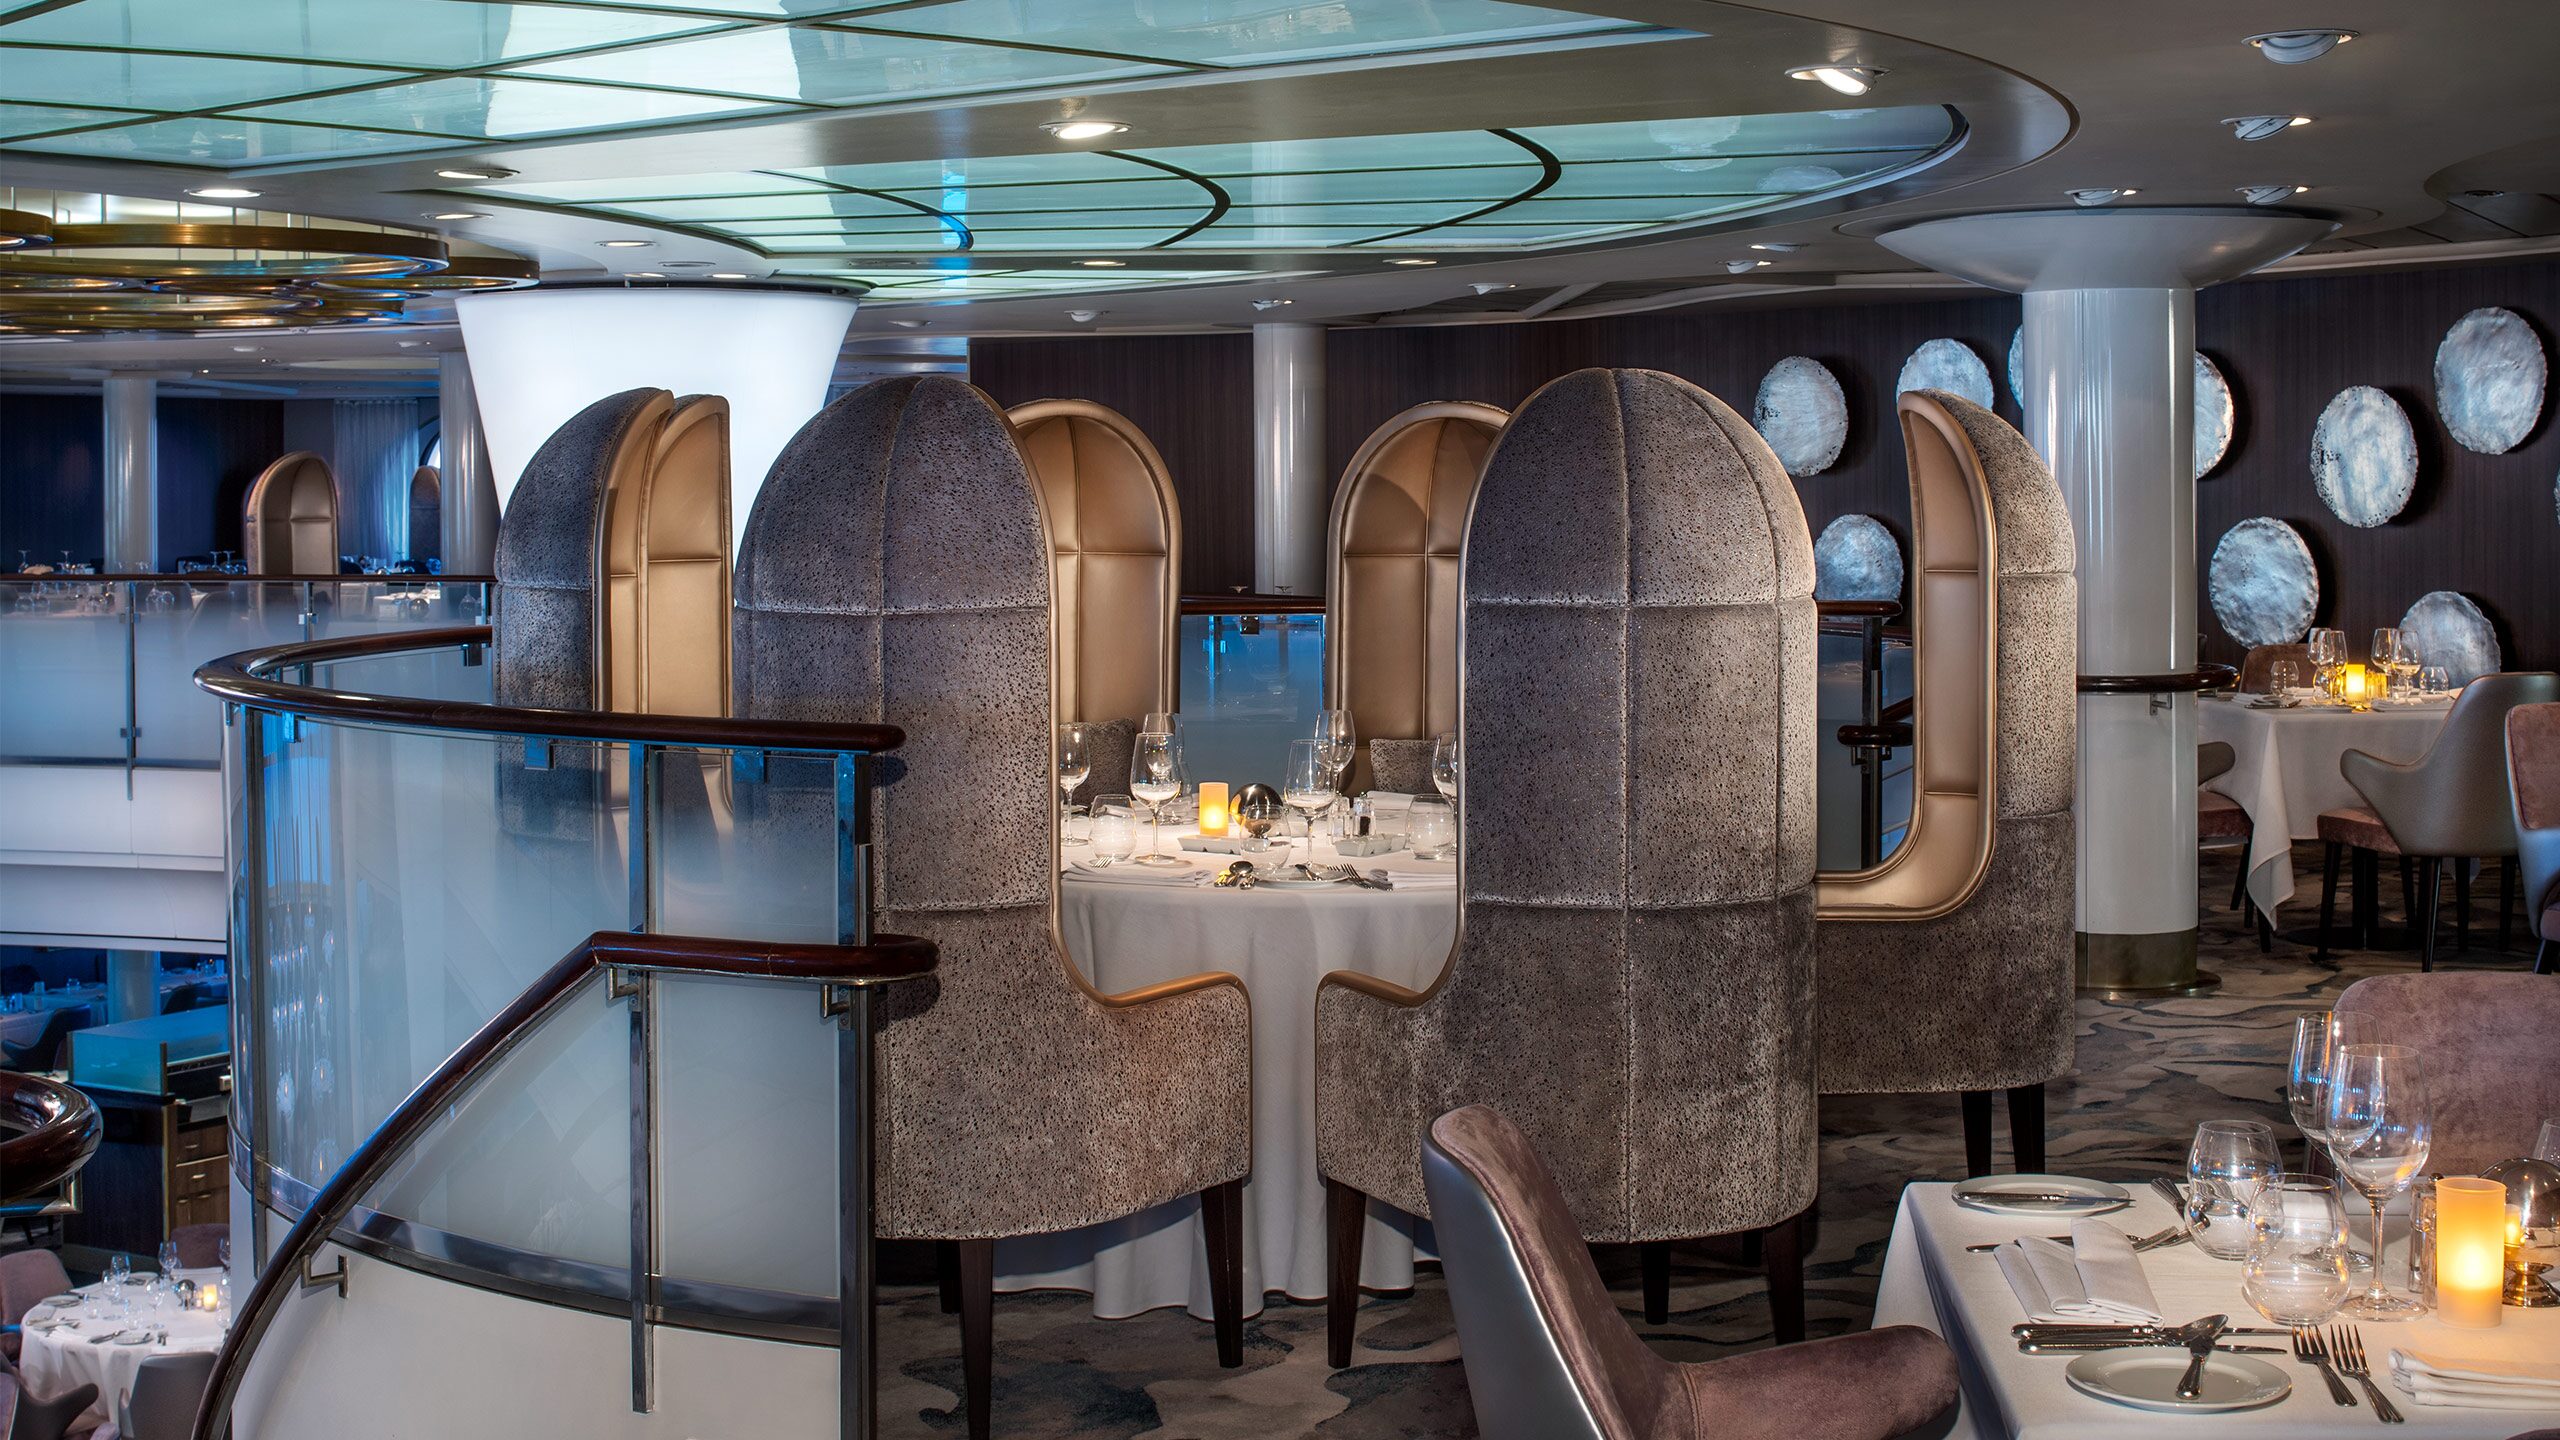 celebrity summit dining room images